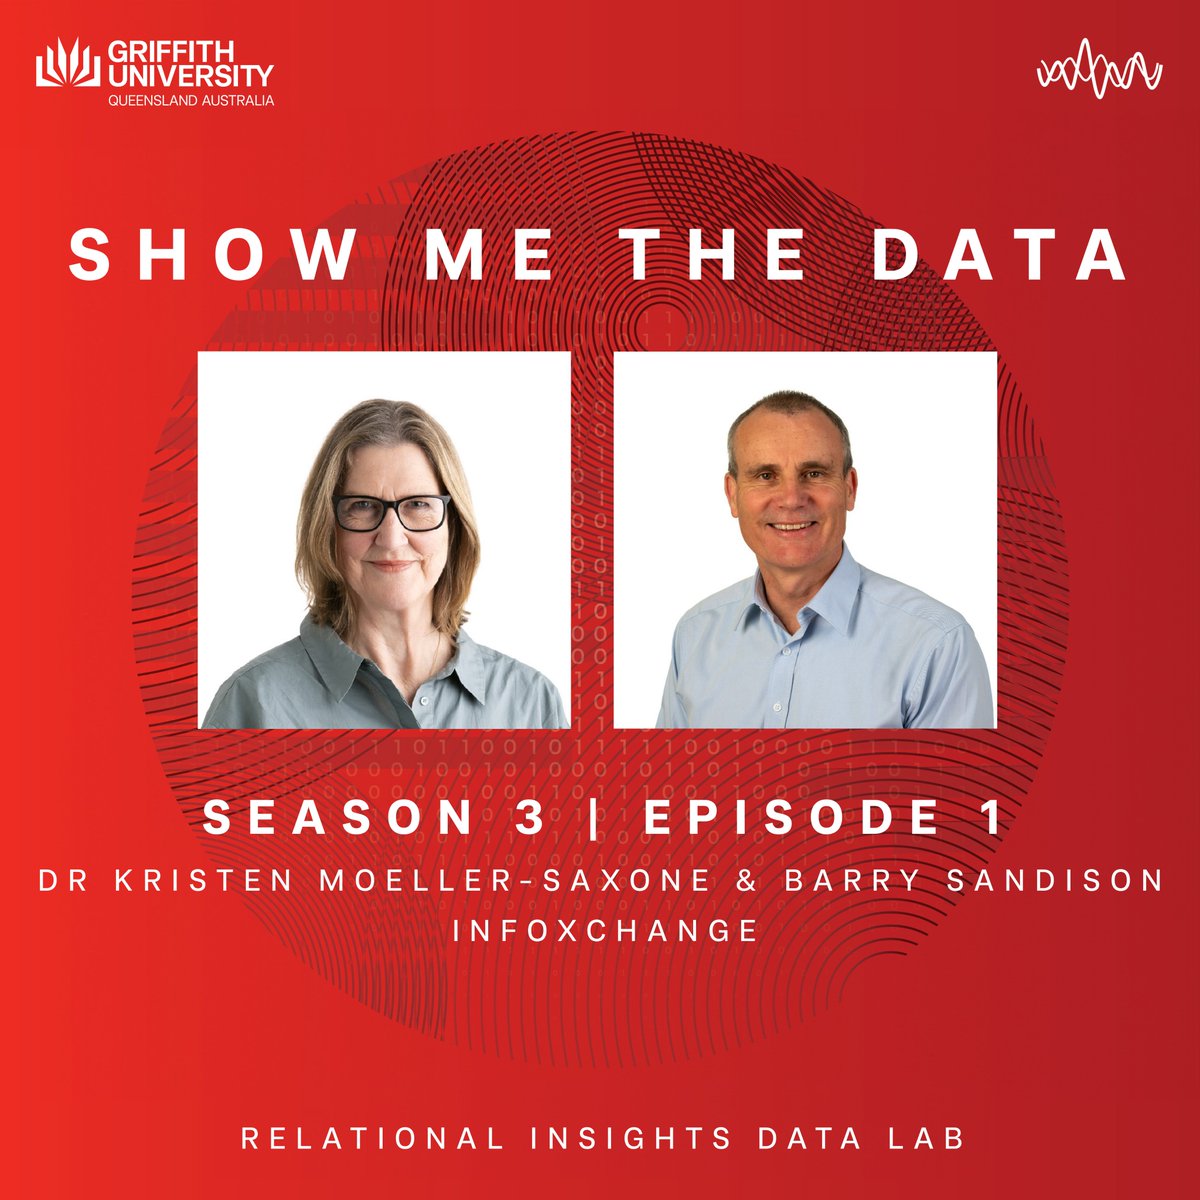 🎙️ Exciting News! Our very own #ShowMeTheData podcast is back for a third season! Tune in as we discuss the findings from the latest 2023 Digital in the Non-for-profit sector report with special guests from @Infoxchange! ridl.com.au/show-me-the-da…